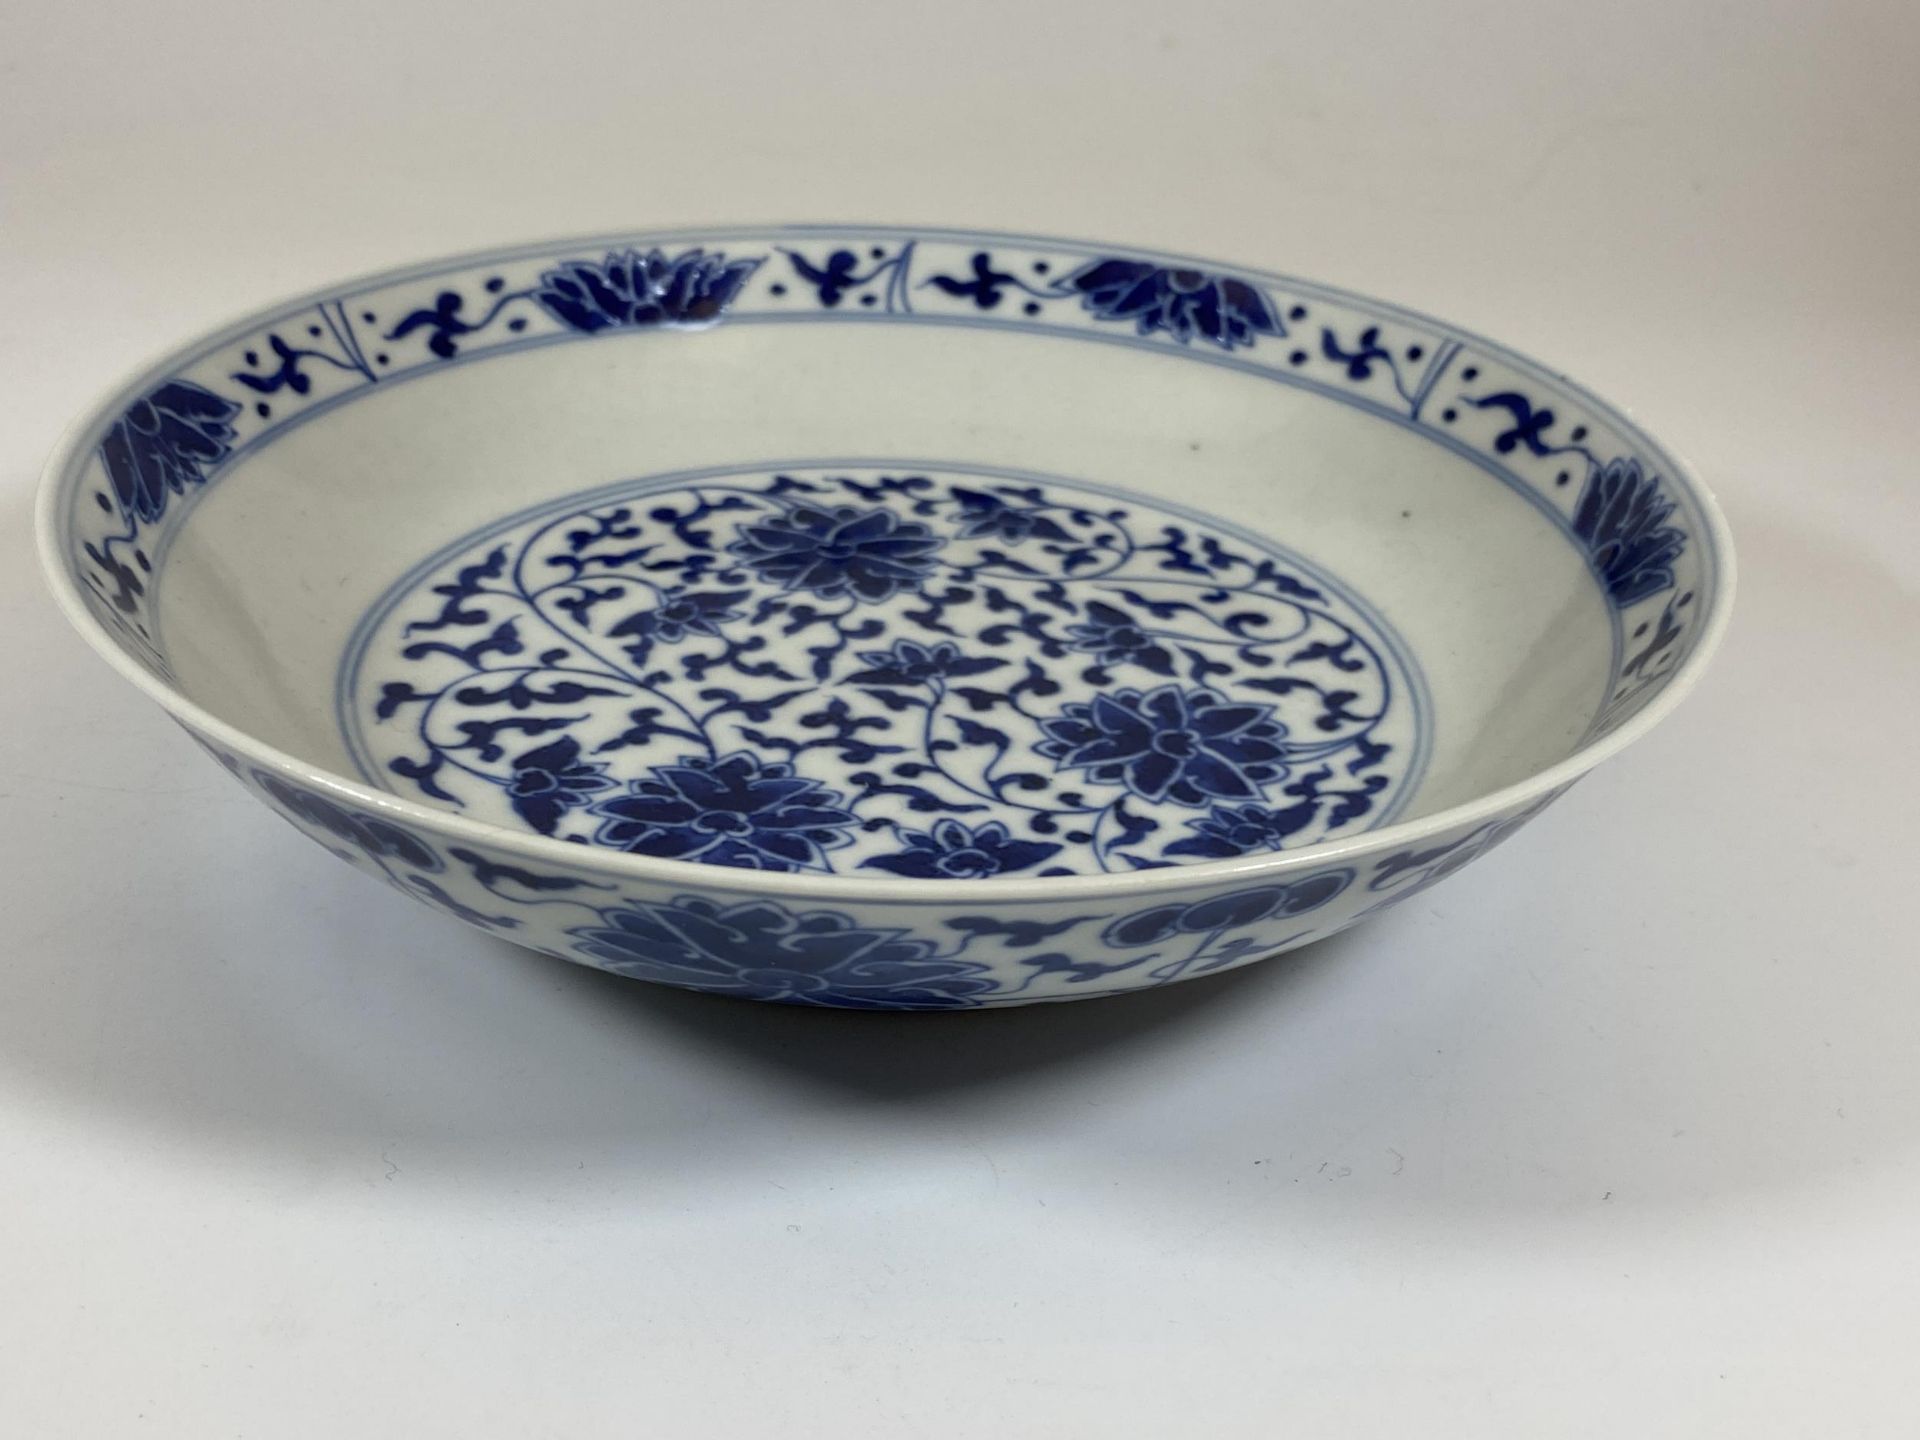 A CHINESE QIANLONG STYLE BLUE AND WHITE FLORAL BOWL / DISH, SIX CHARACTER MARK TO BASE, DIAMETER - Image 3 of 6